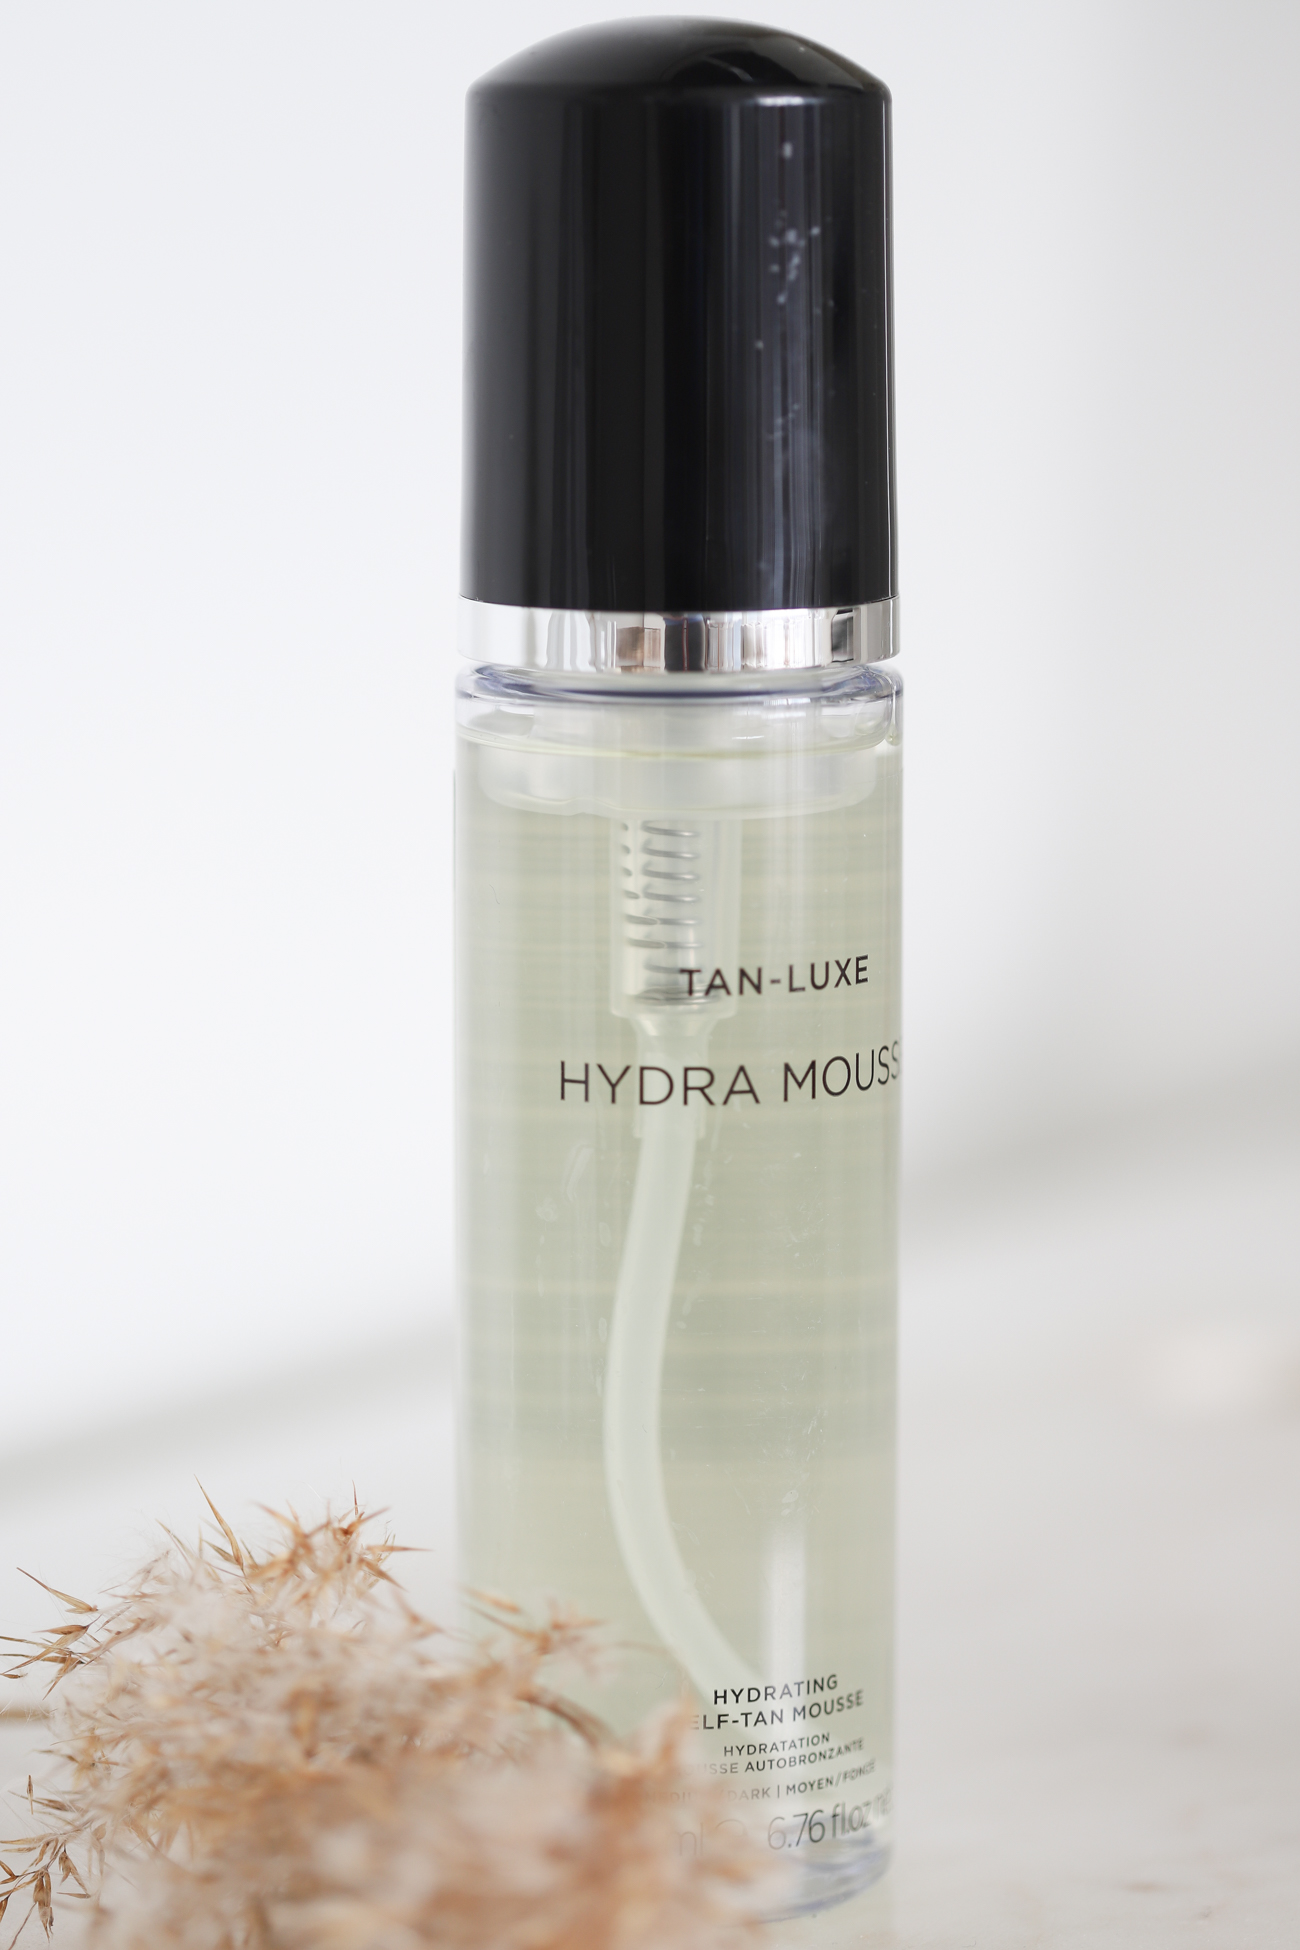 Tan-luxe hydra mousse 